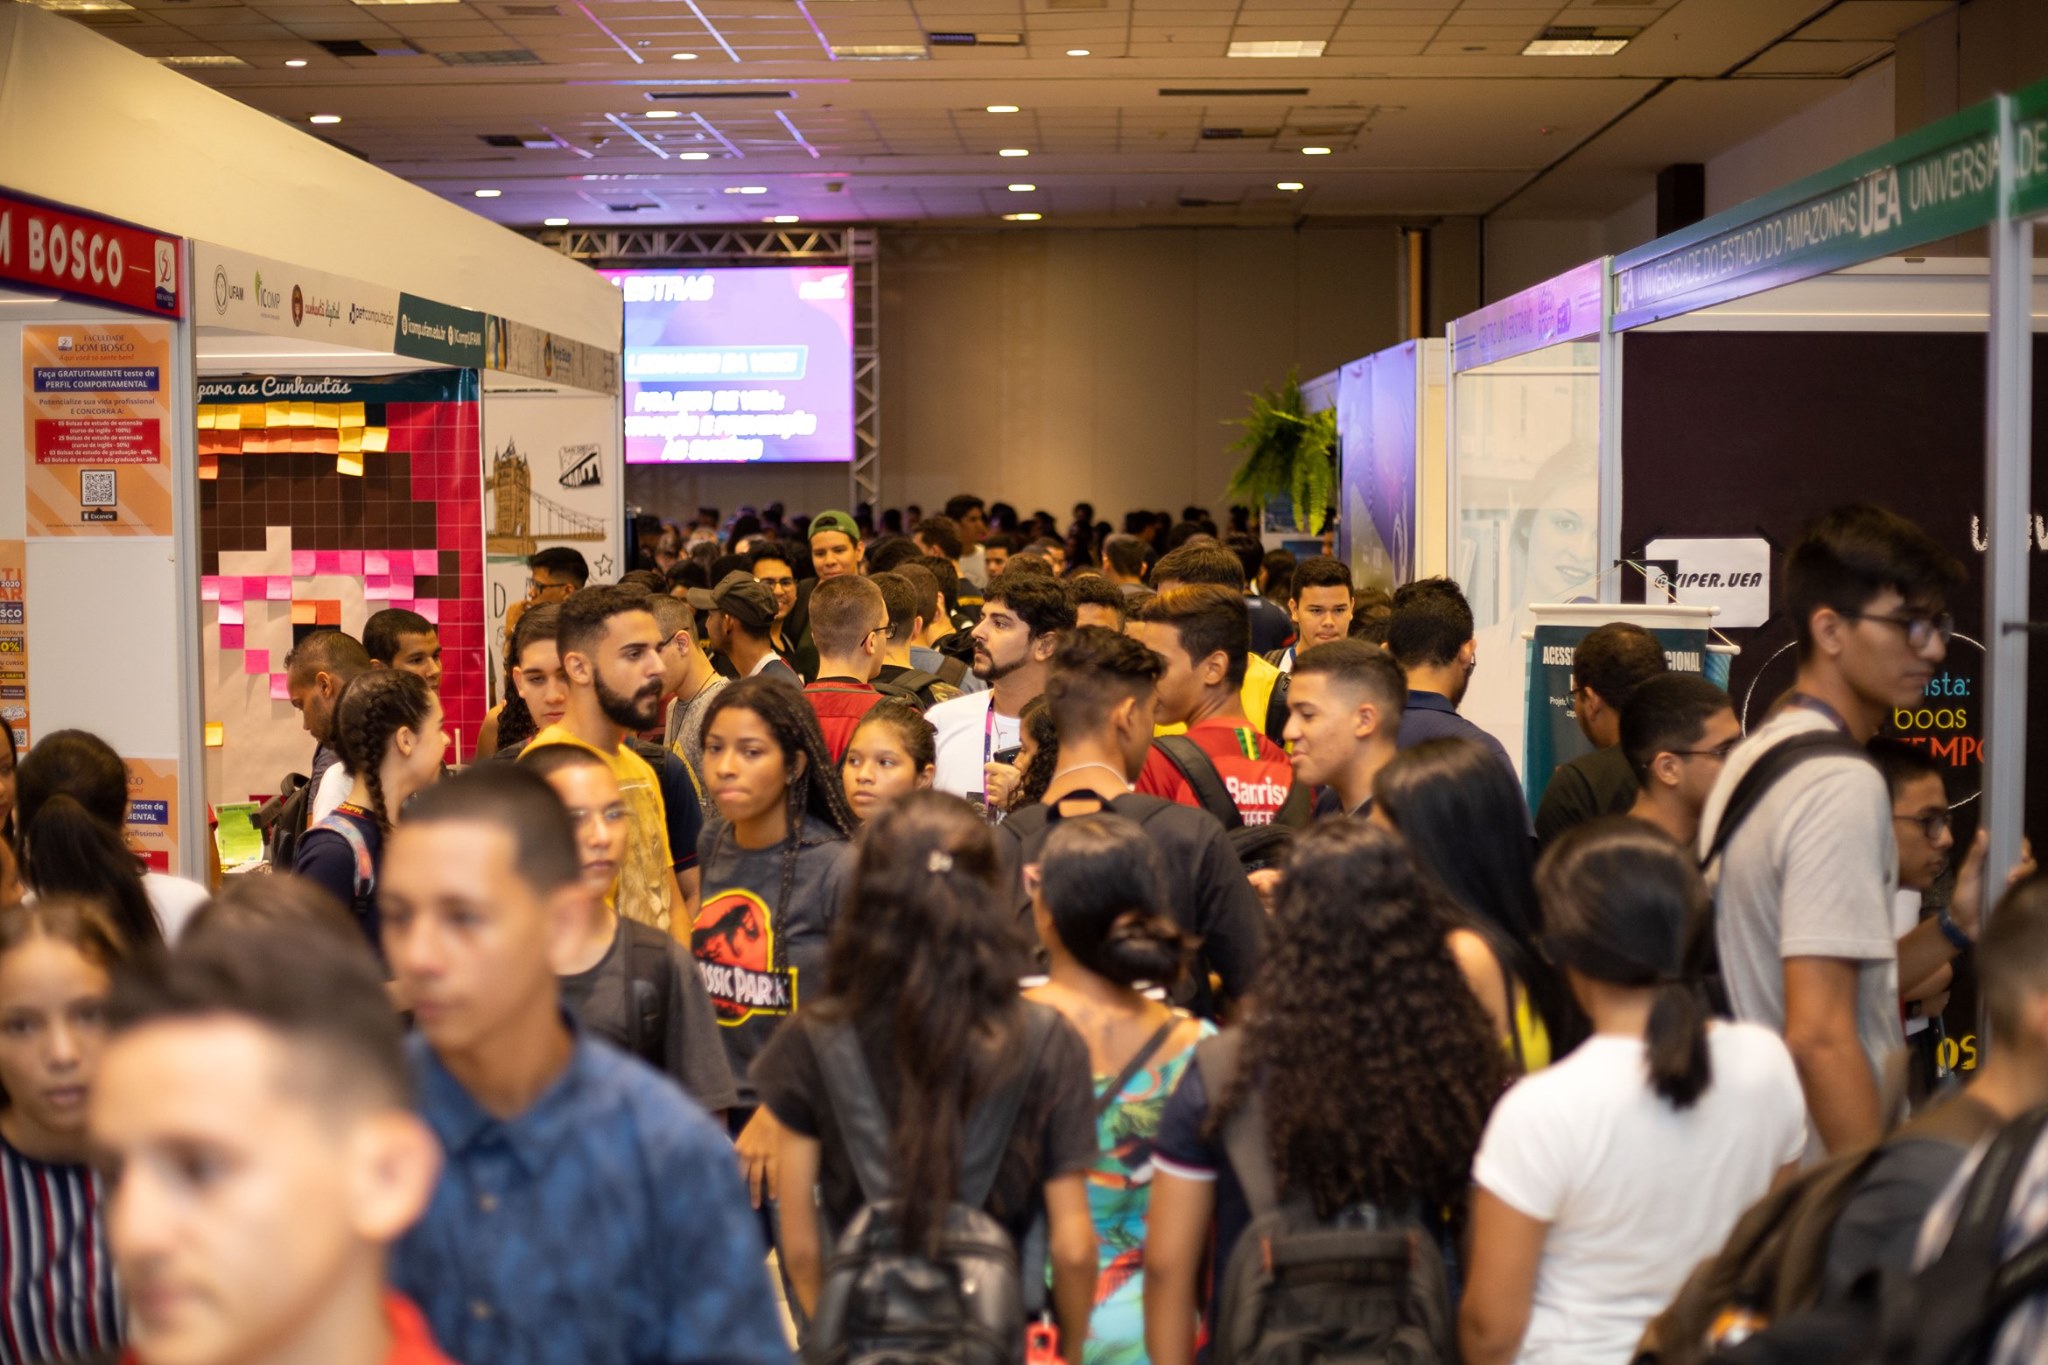 North Student Fair 2023 will feature 110 lectures on professions and the job market